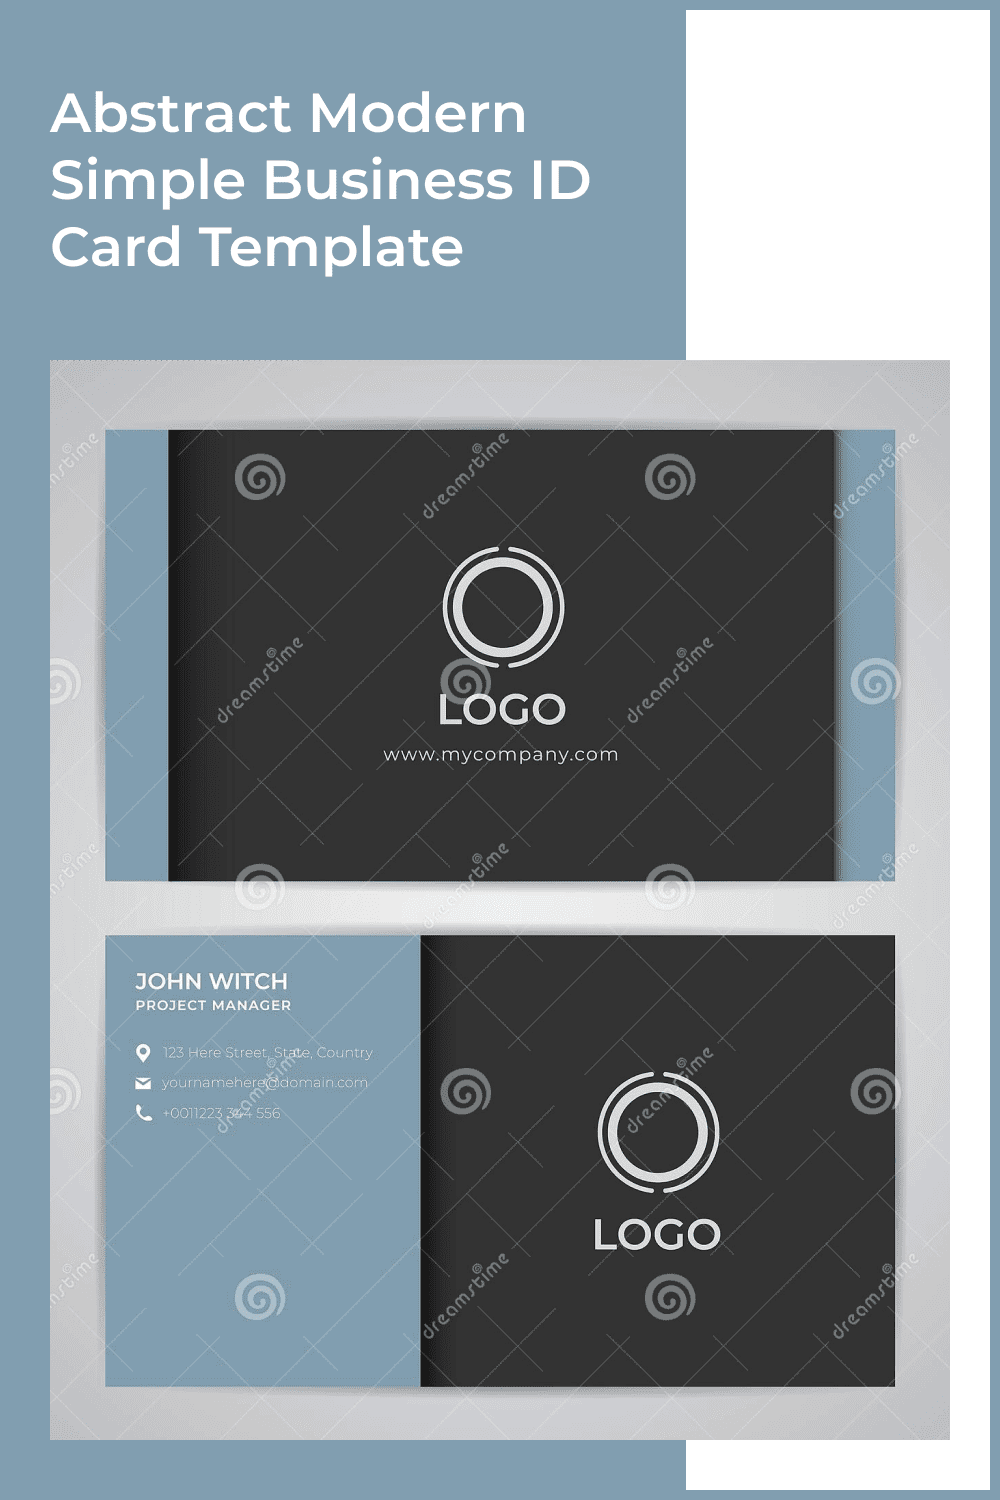 A dark template for any area of ​​business.